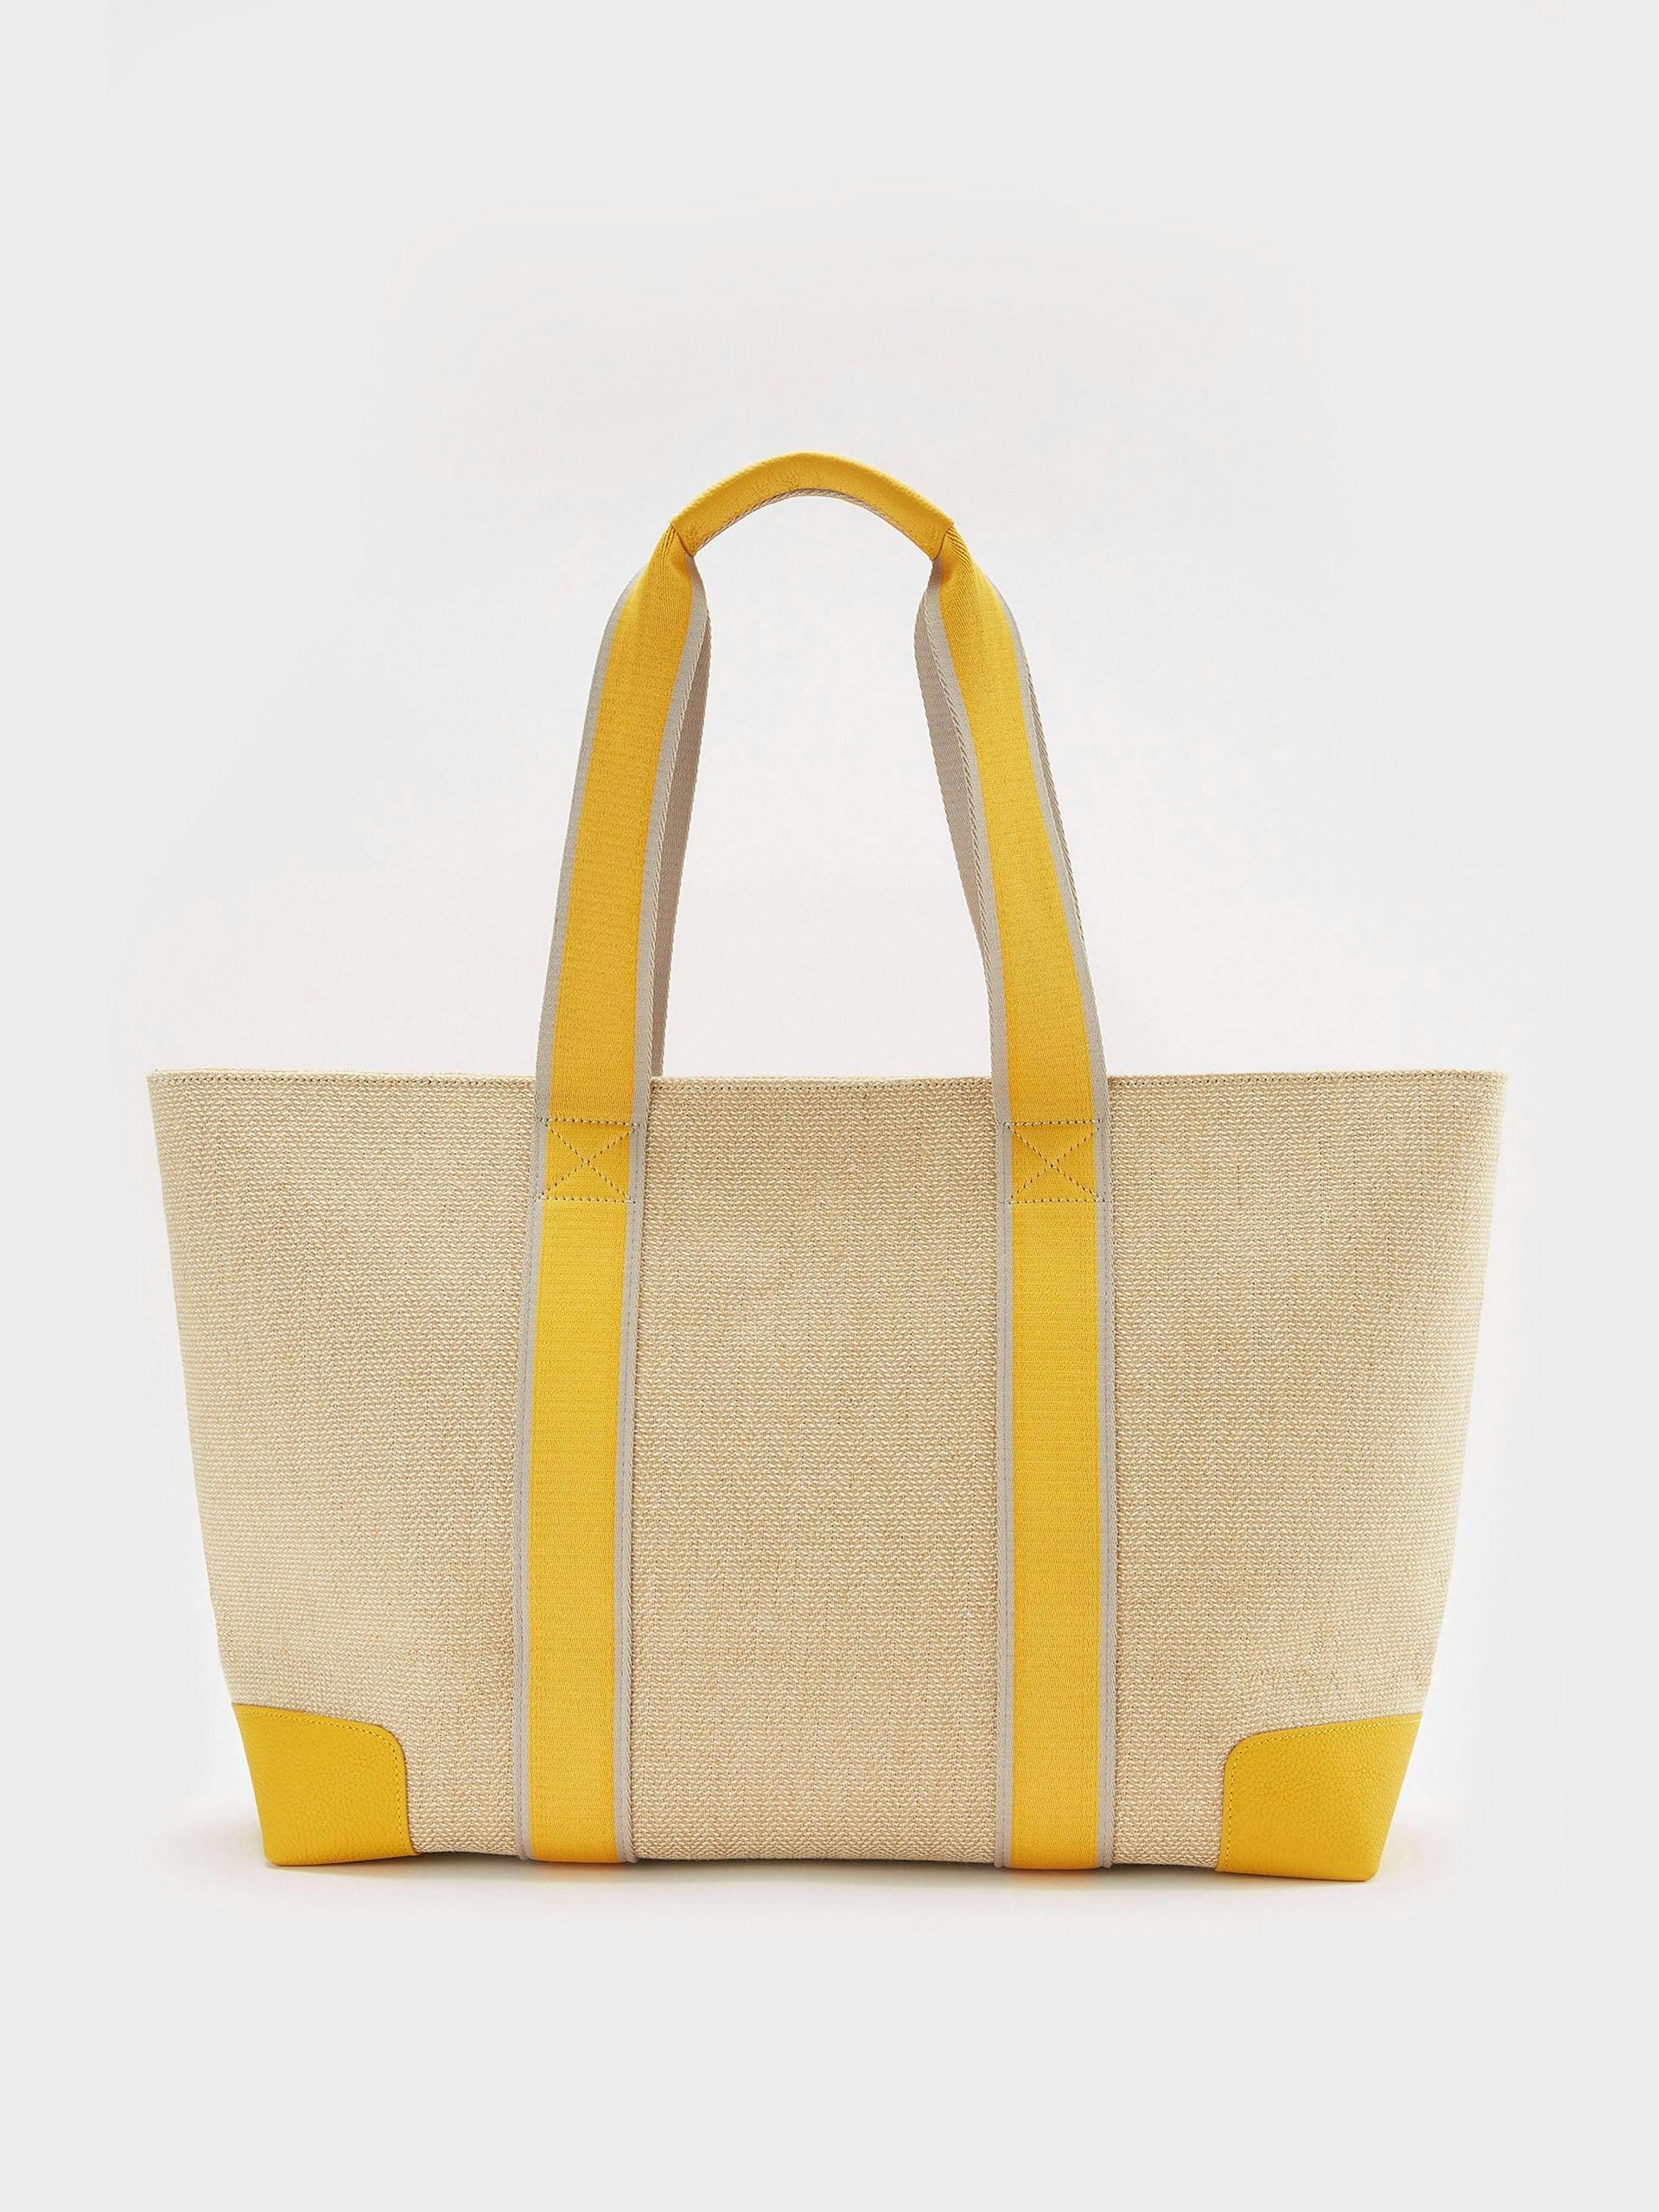 The Luxe beach bag in sunshine yellow